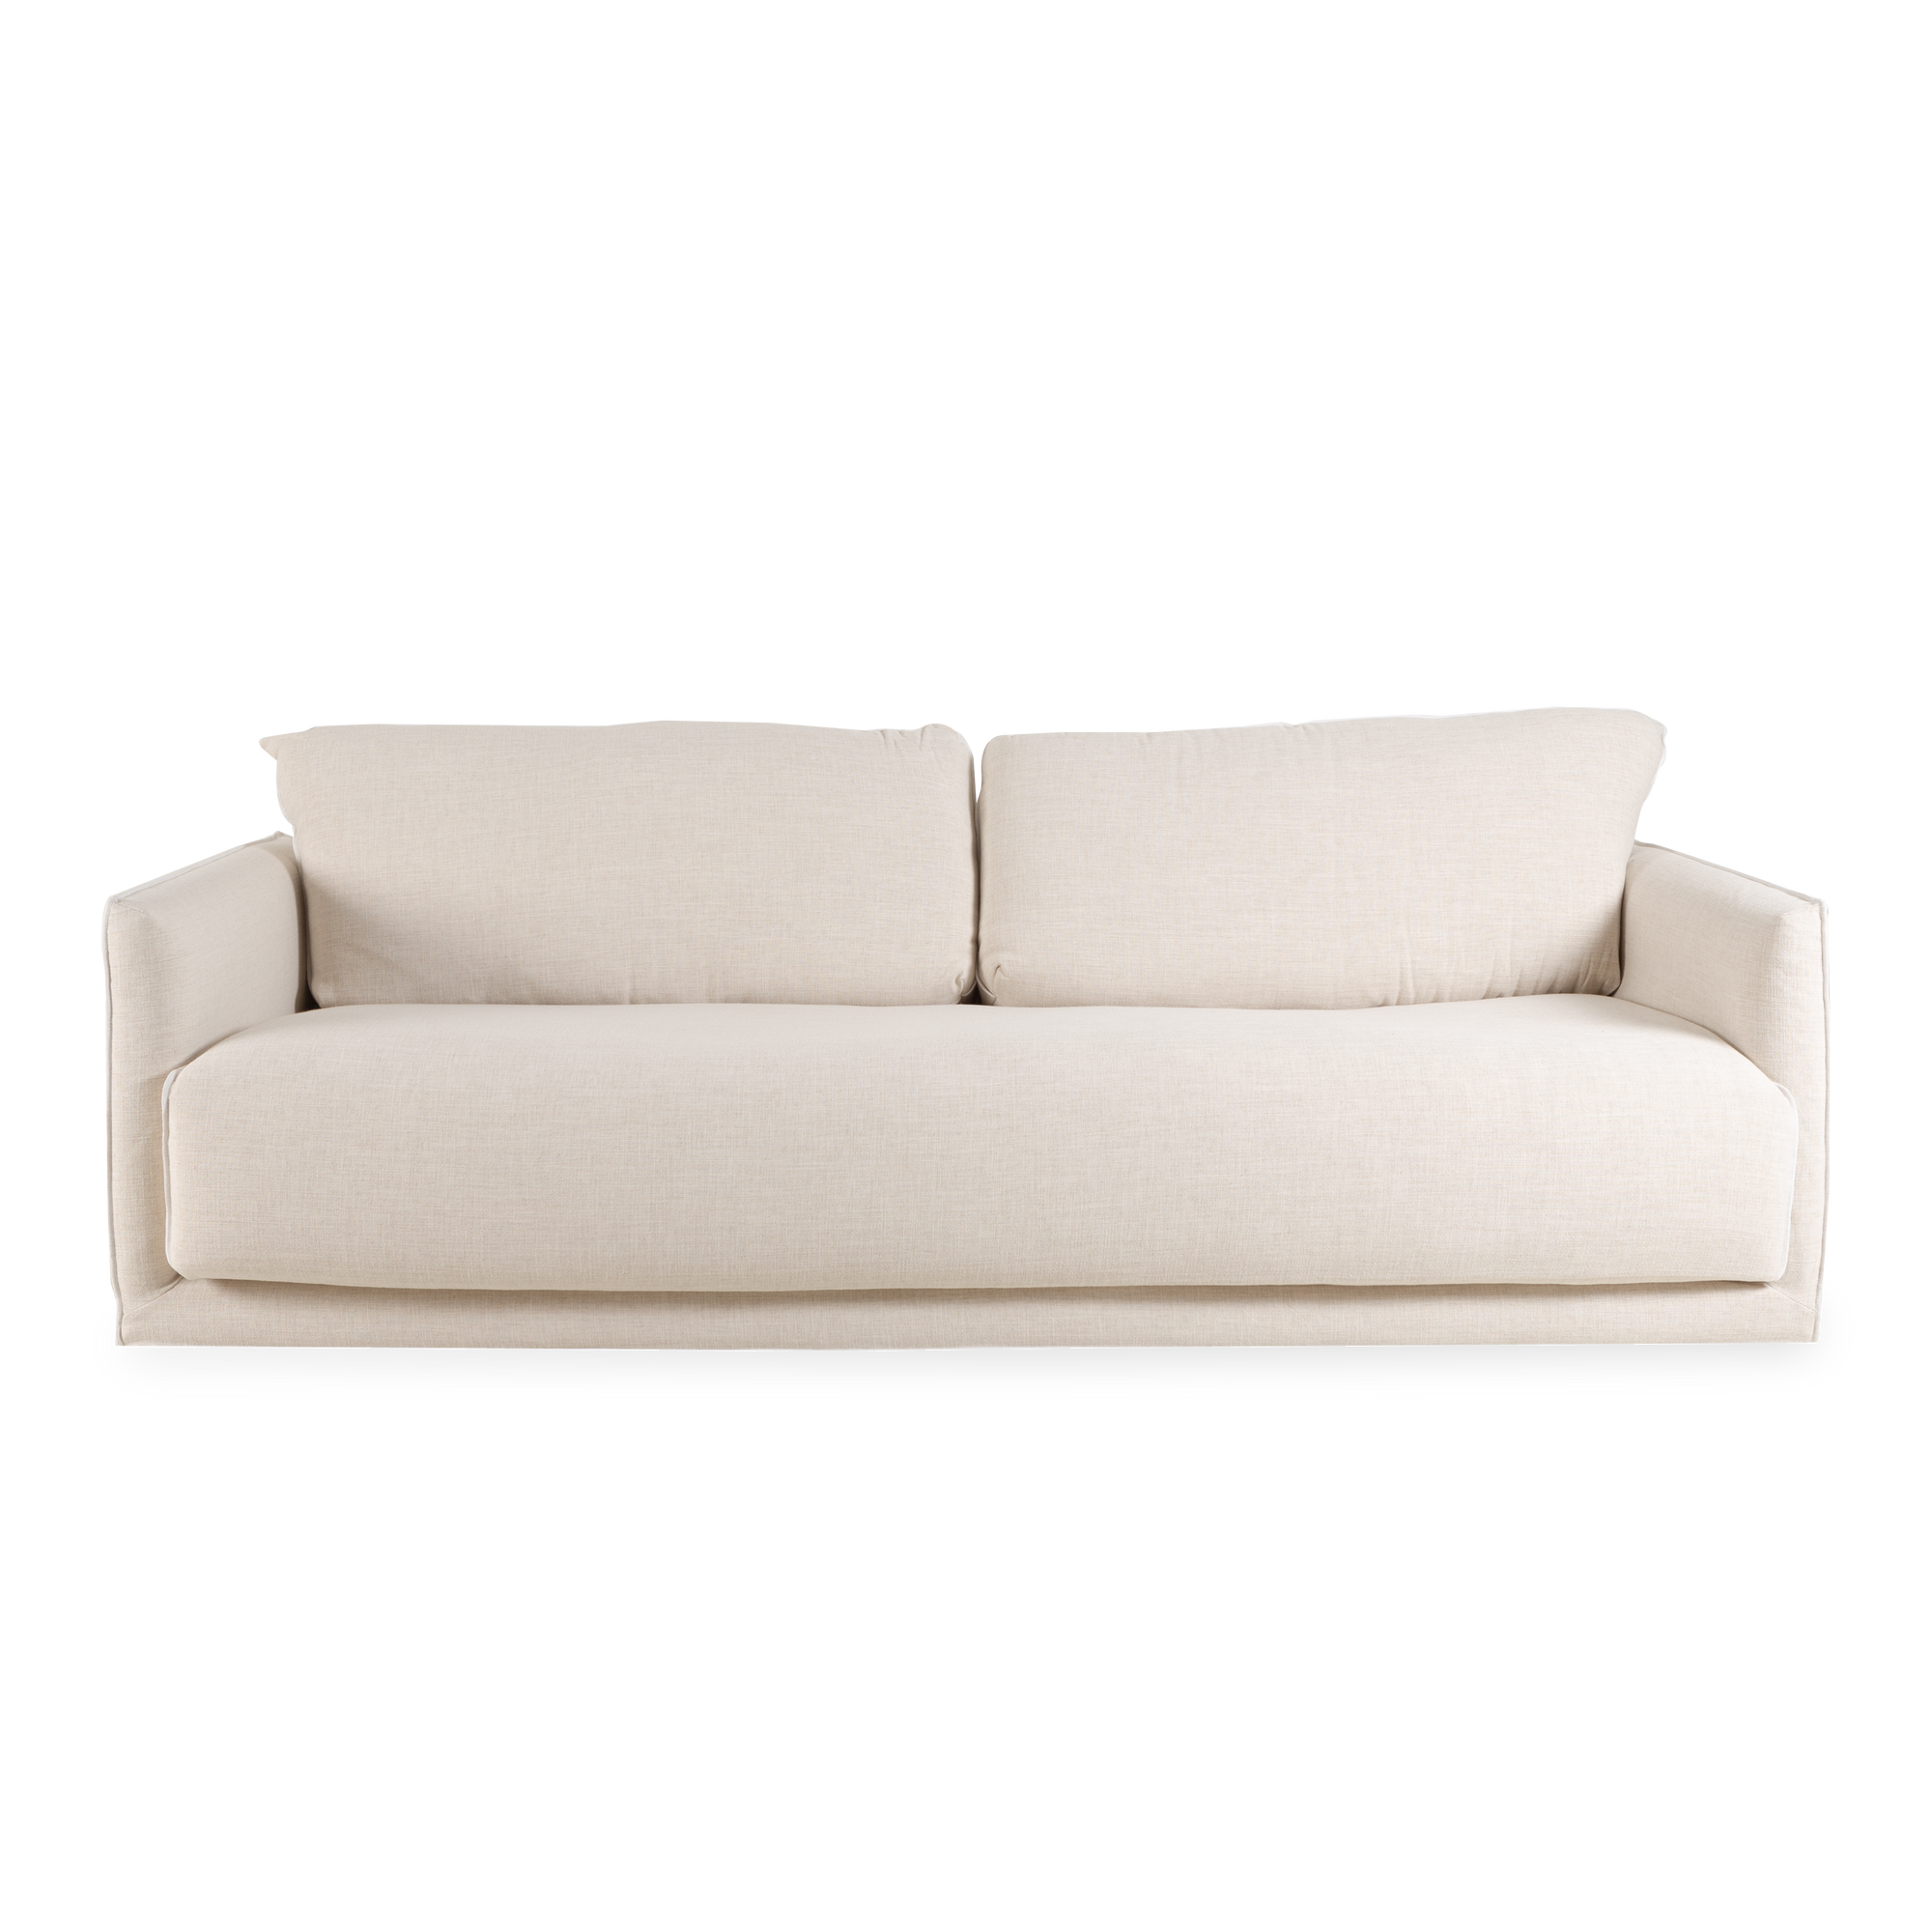 Embodying a casual sophistication, the Whitecliff Sofa invites relaxation with its luxuriously thick cushioning, while slender arms lend an air of refinement.